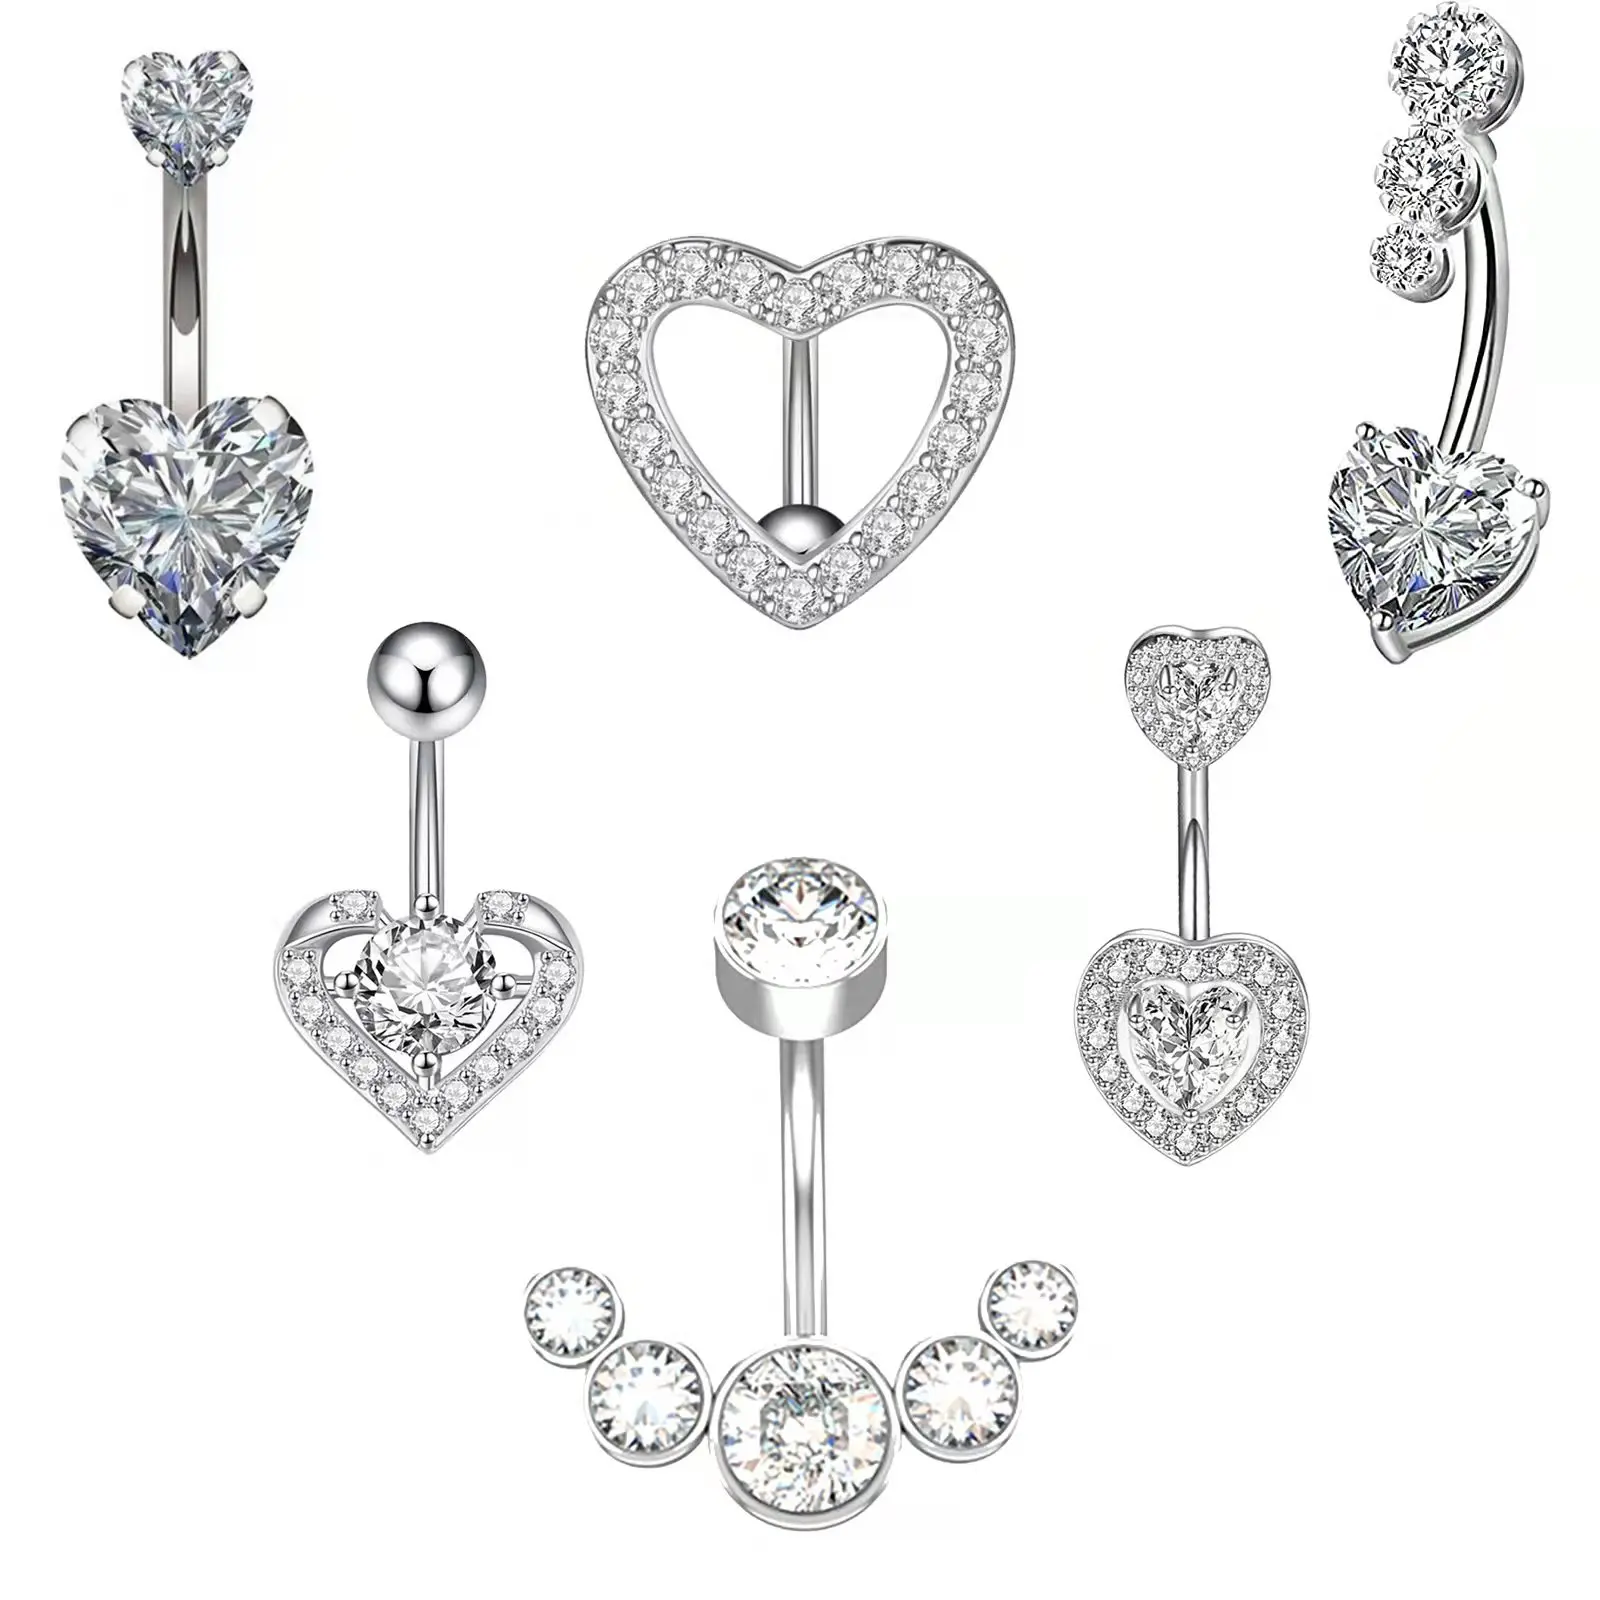 Heart Belly Button Ring Navel Piercing Ring Cooper Belly Button Piercing Ring JewelryNavel Pircing Umbilical Pircing Ring